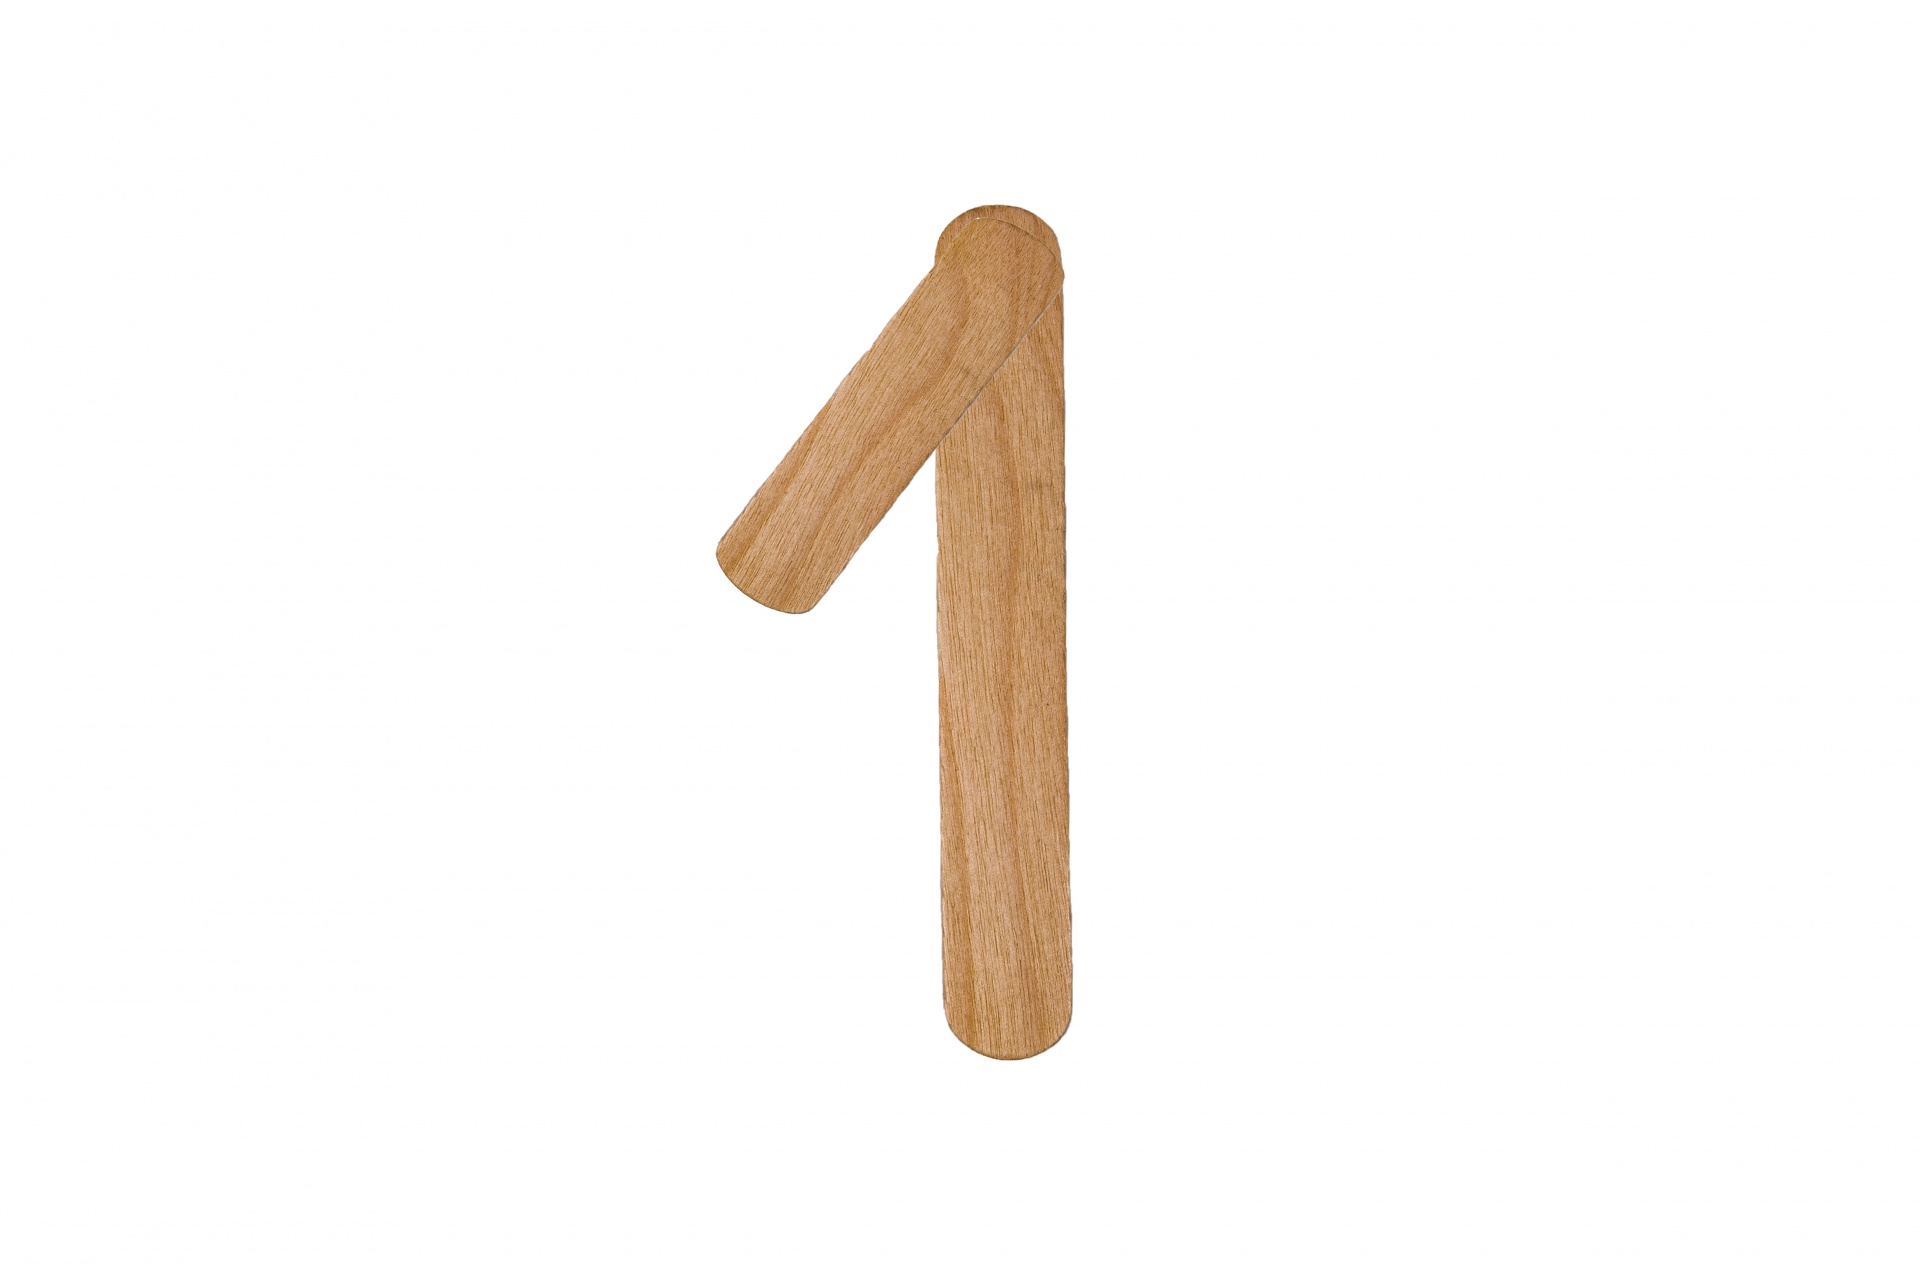 1 wooden number free photo